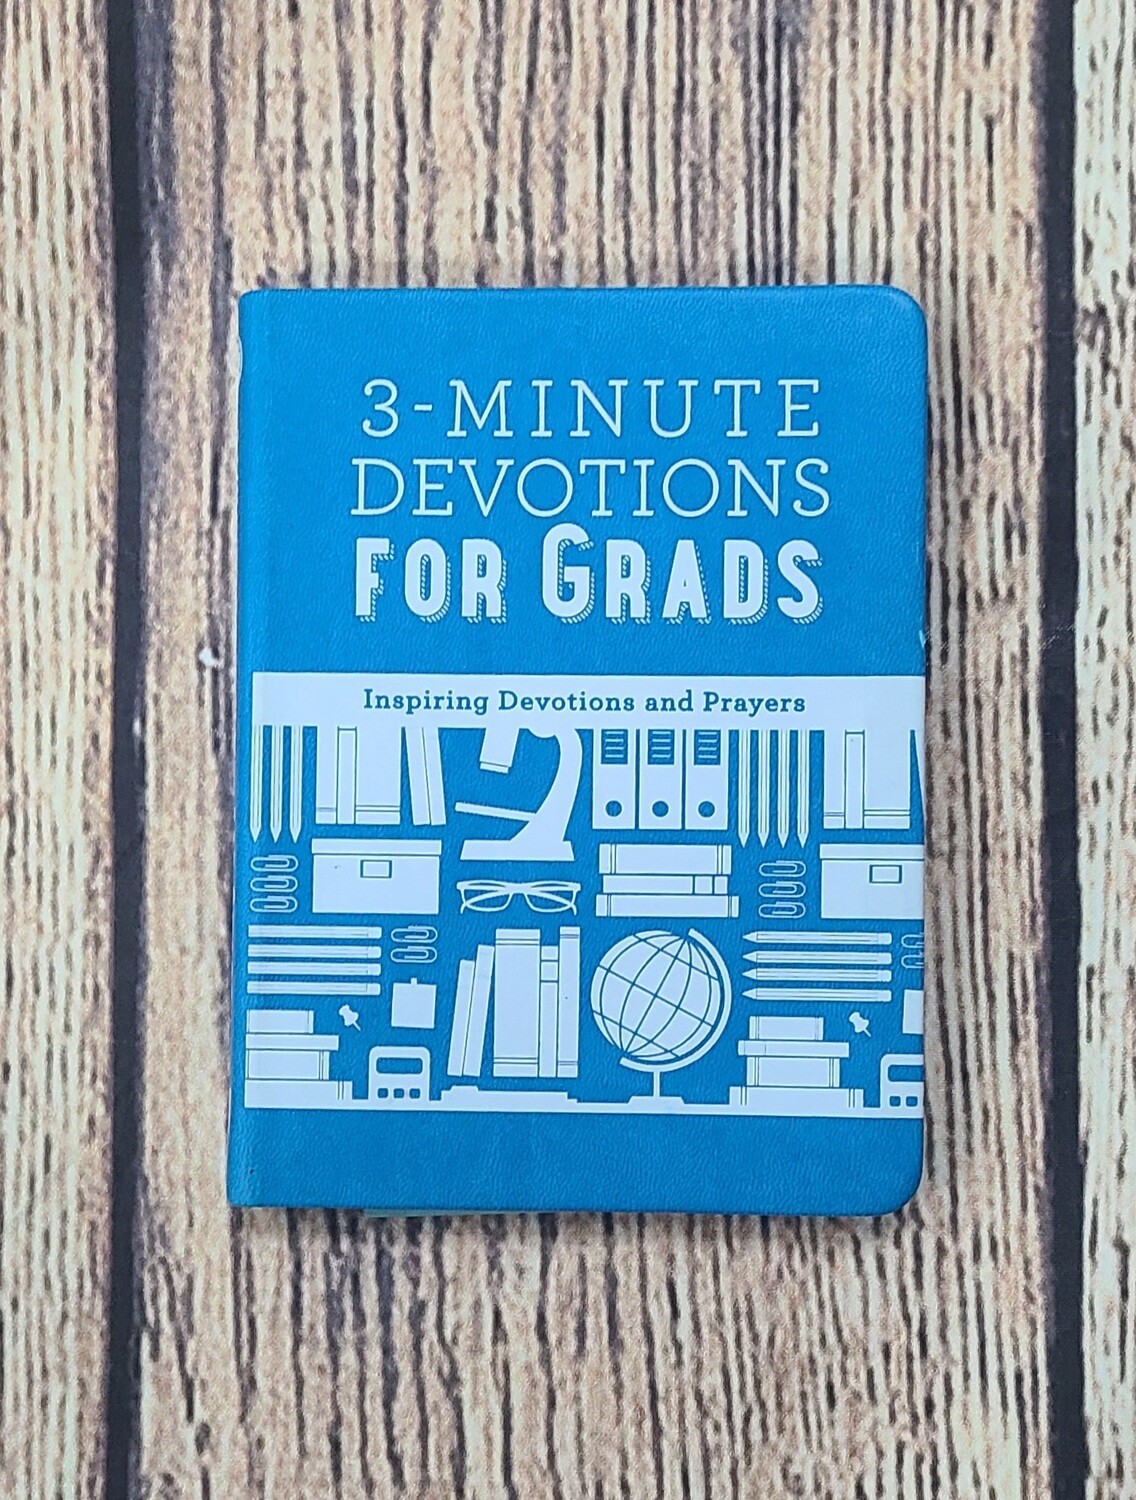 3-Minute Devotions for Grads: Inspiring Devotions and Prayers by Barbour Publishing - Great Condition